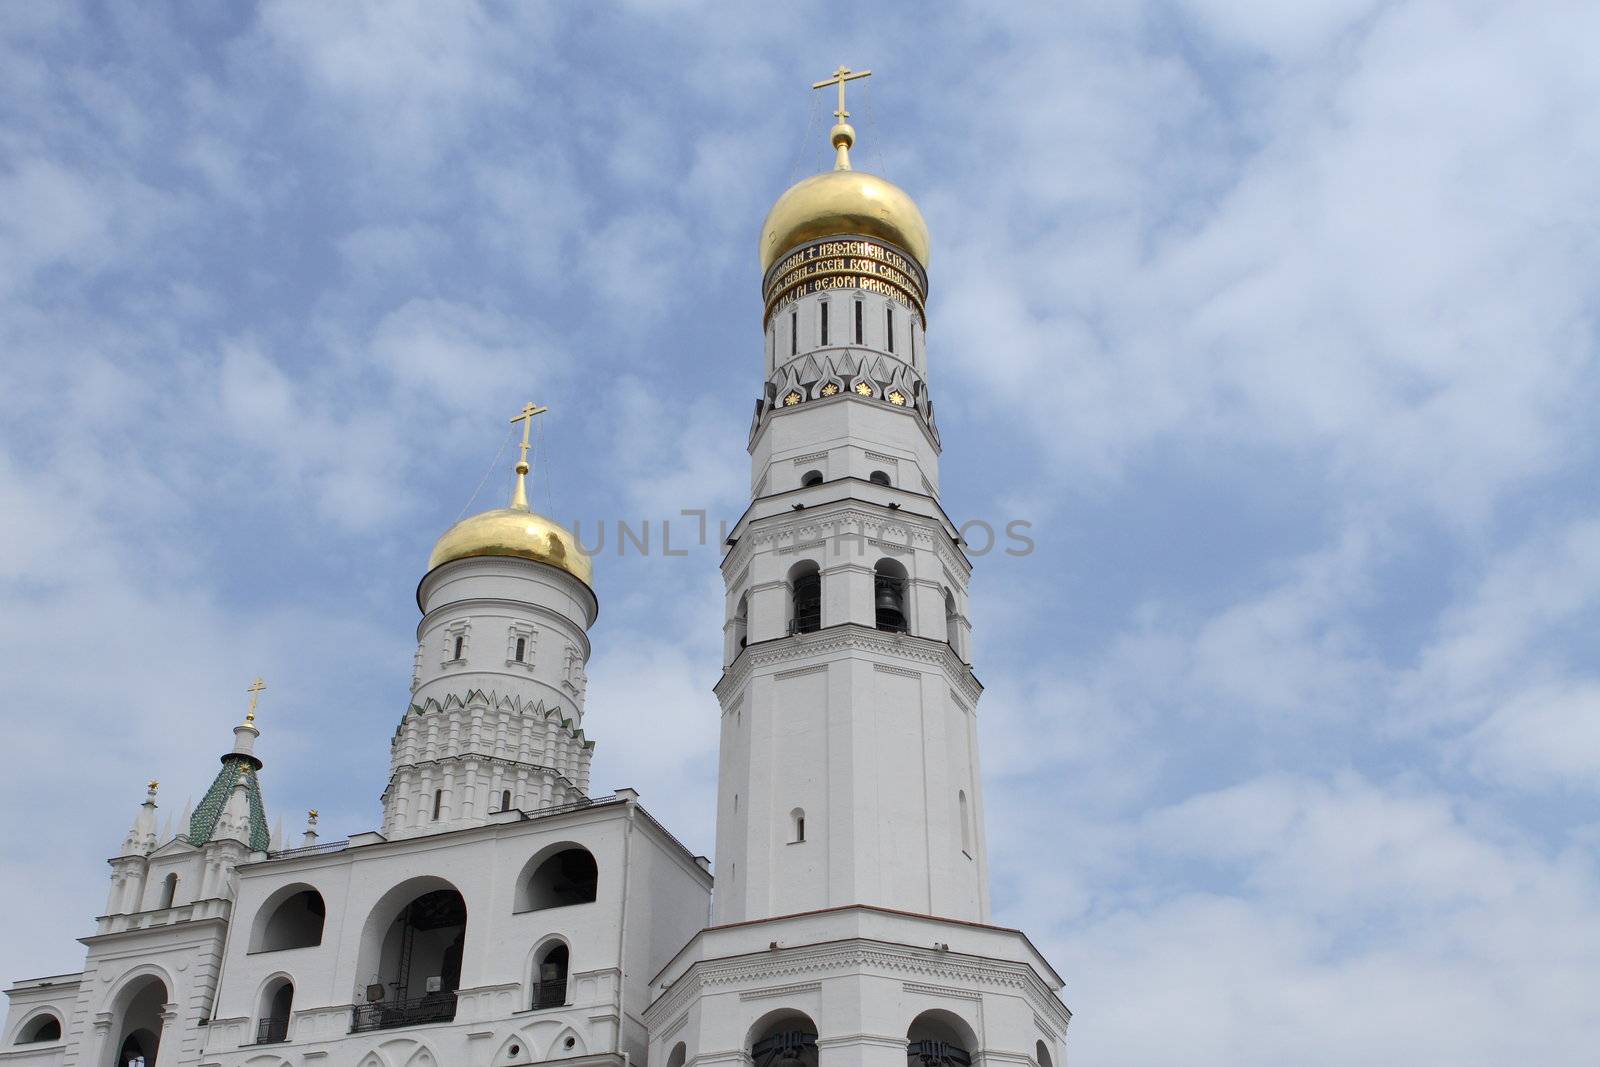 The Russian orthodoxy temple